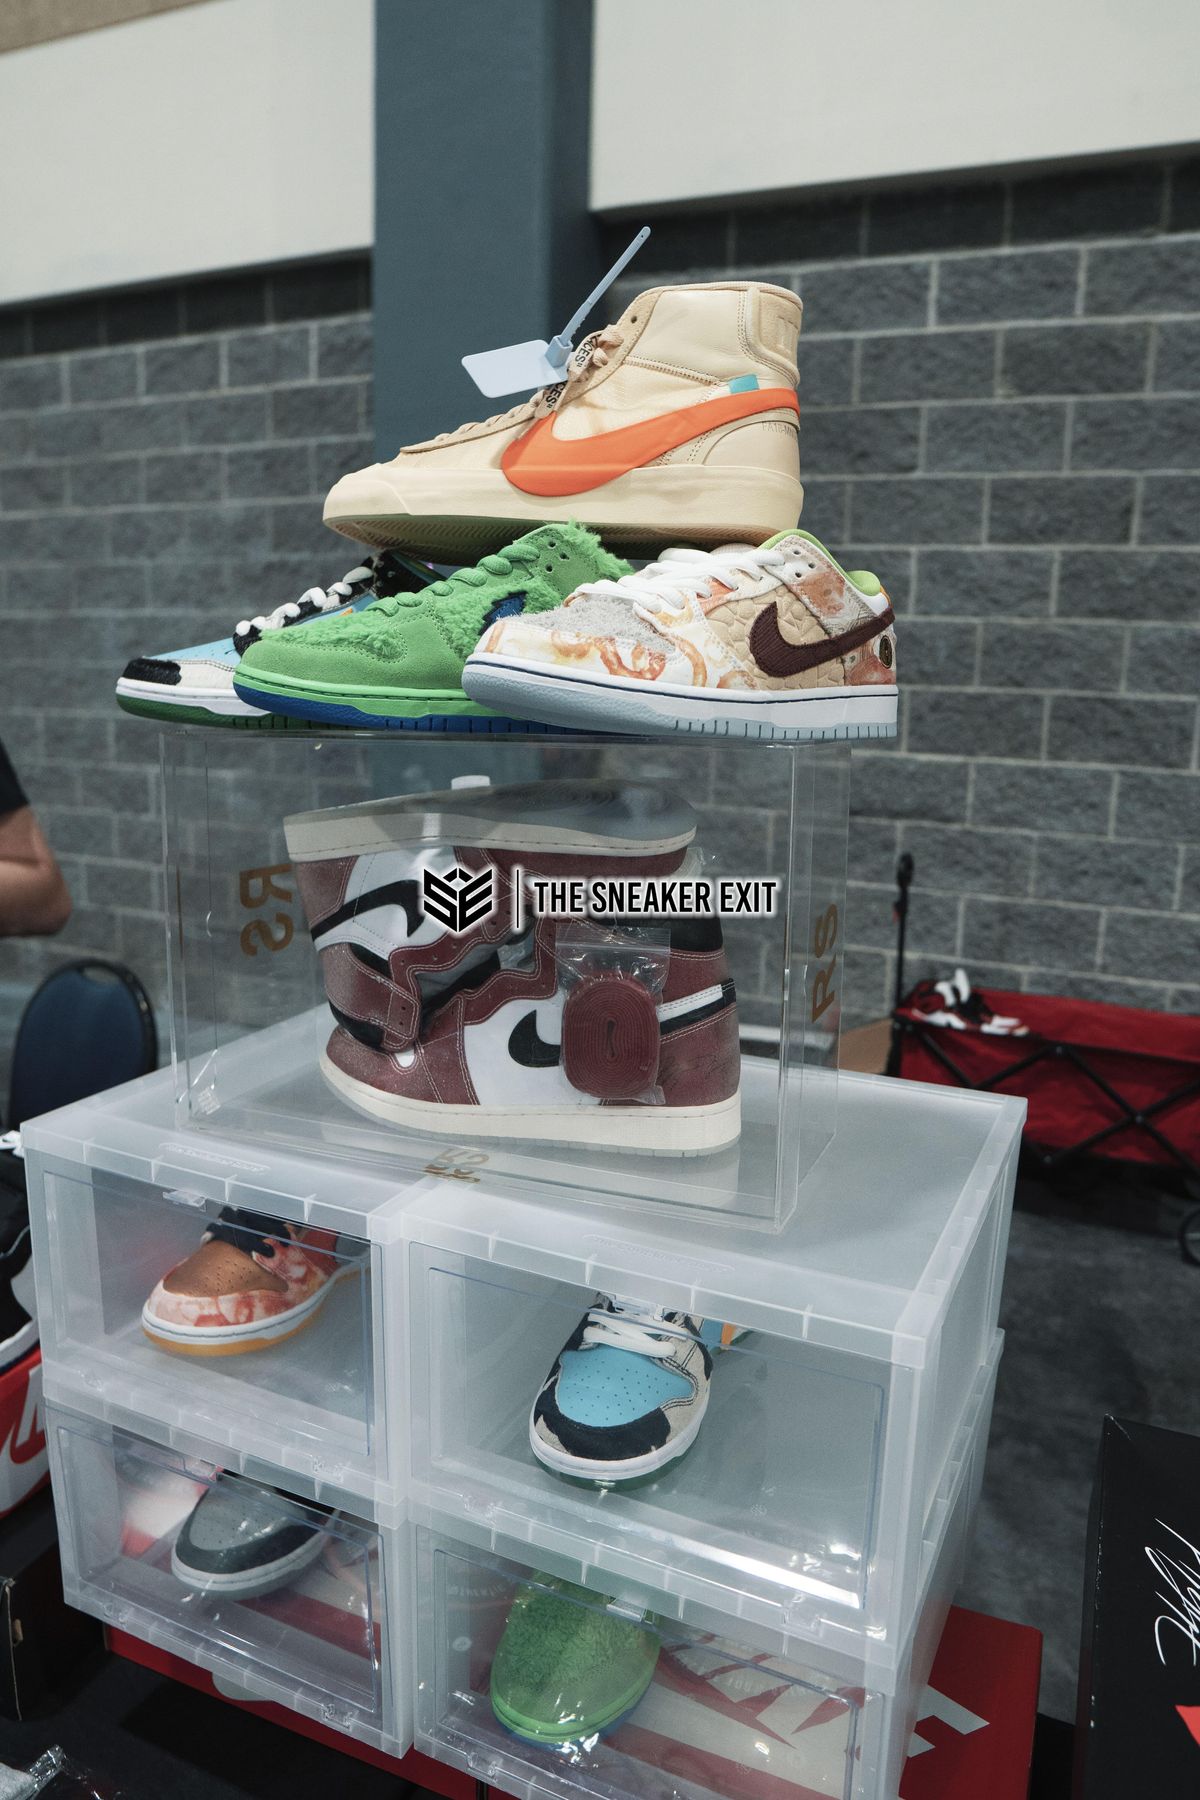 Dallas The Sneaker Exit Ultimate Sneaker Trade Show, Irving